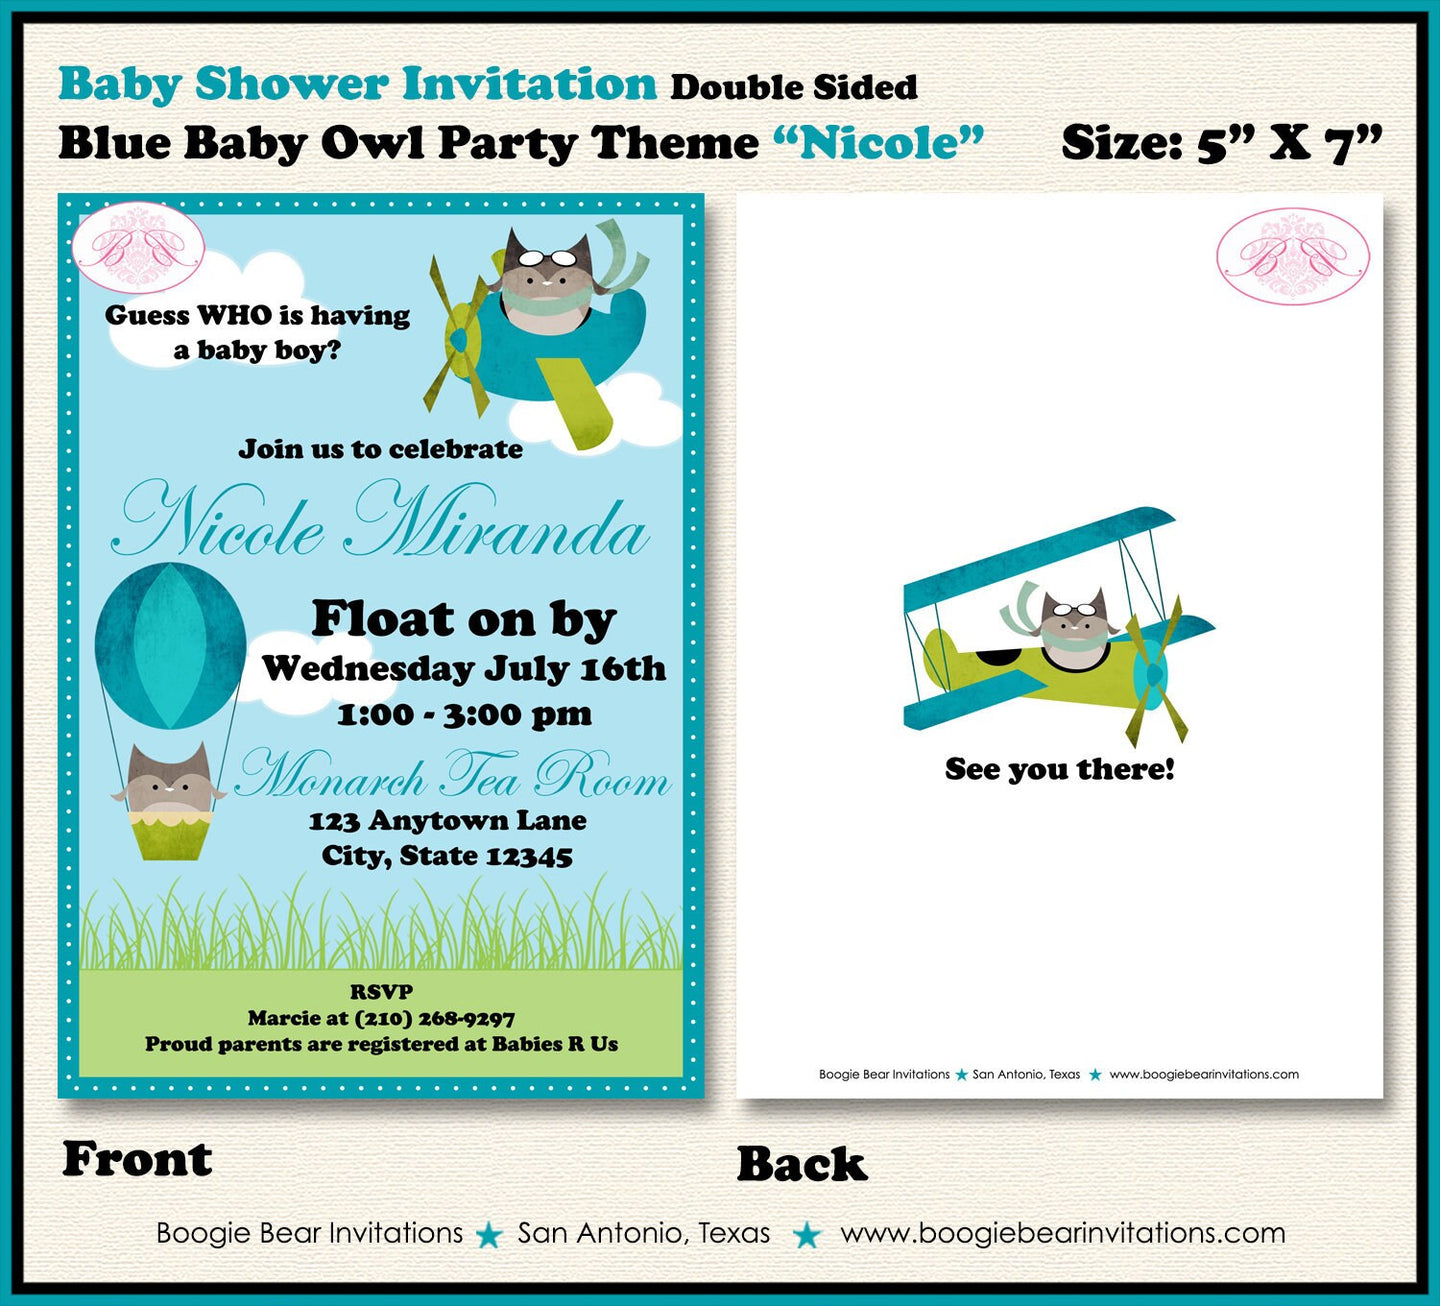 Blue Aviator Owl Baby Shower Invitation Party Airplane Flying Pilot Boy Fly Boogie Bear Invitations Nicole Theme Paperless Printable Printed